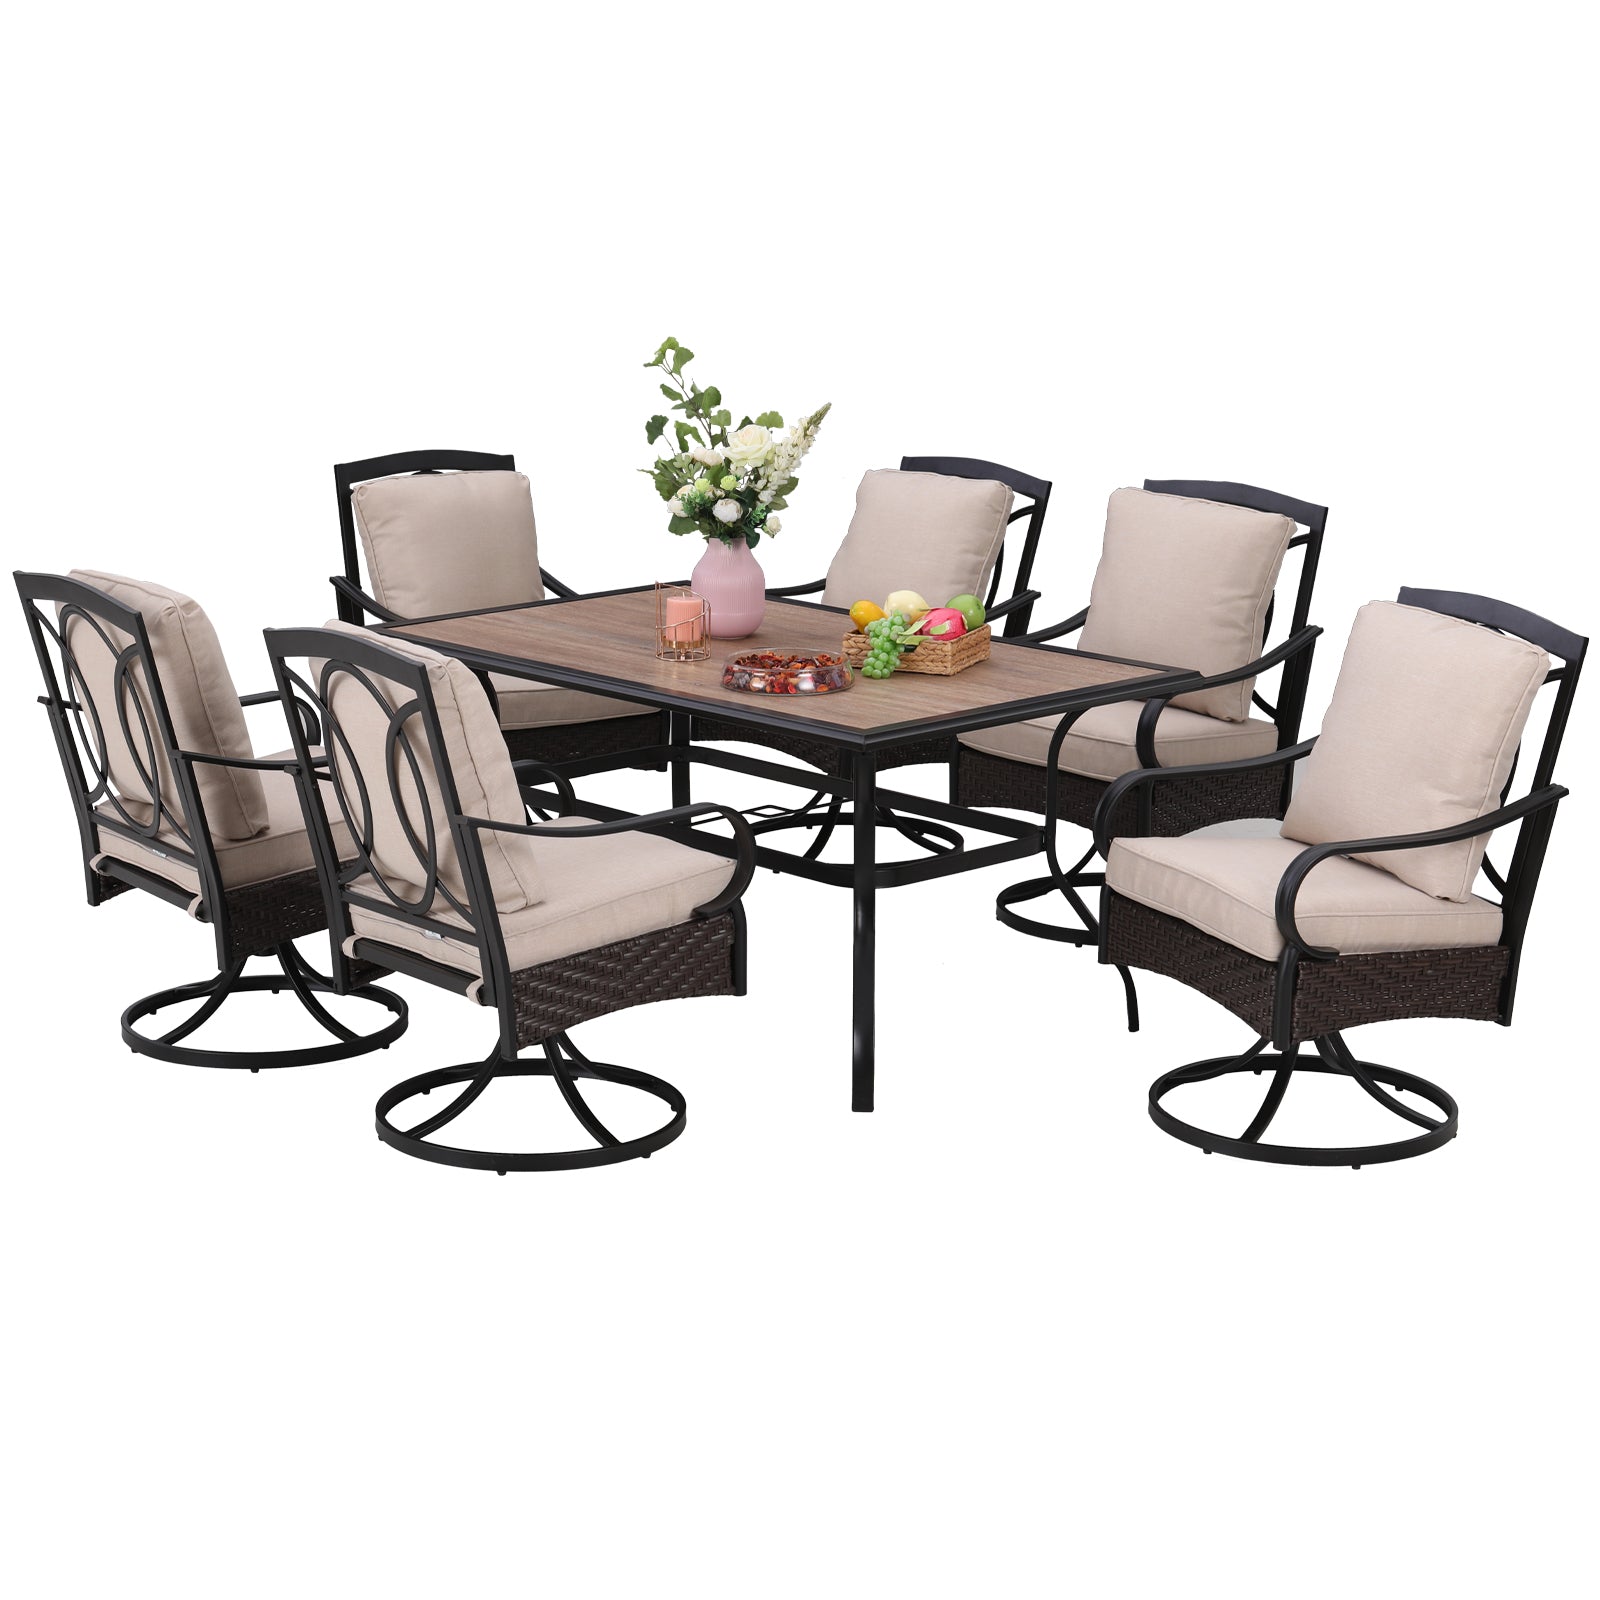 Sophia & William 7-Piece Wood-look Rectangle Table & Thick-Cushion Swivel Chairs Outdoor Paio Dining Set